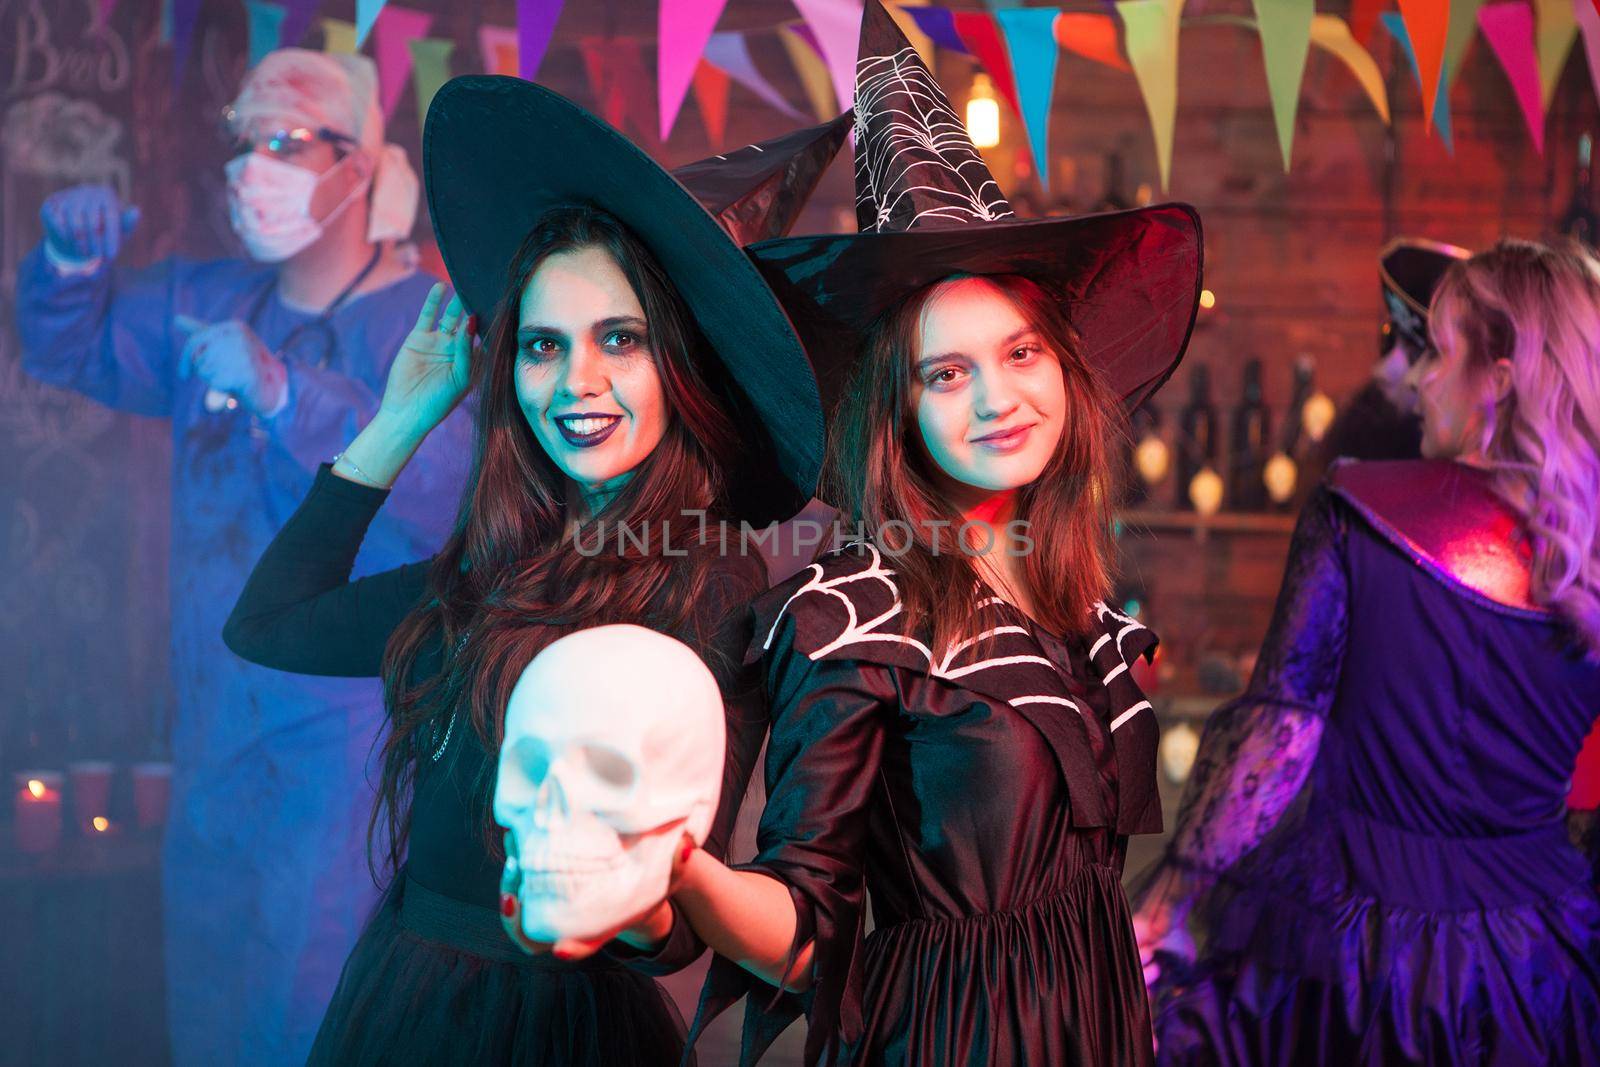 Sisters dressed up like witches at a halloween party holding a skull. Witches gathering. Halloween costume.